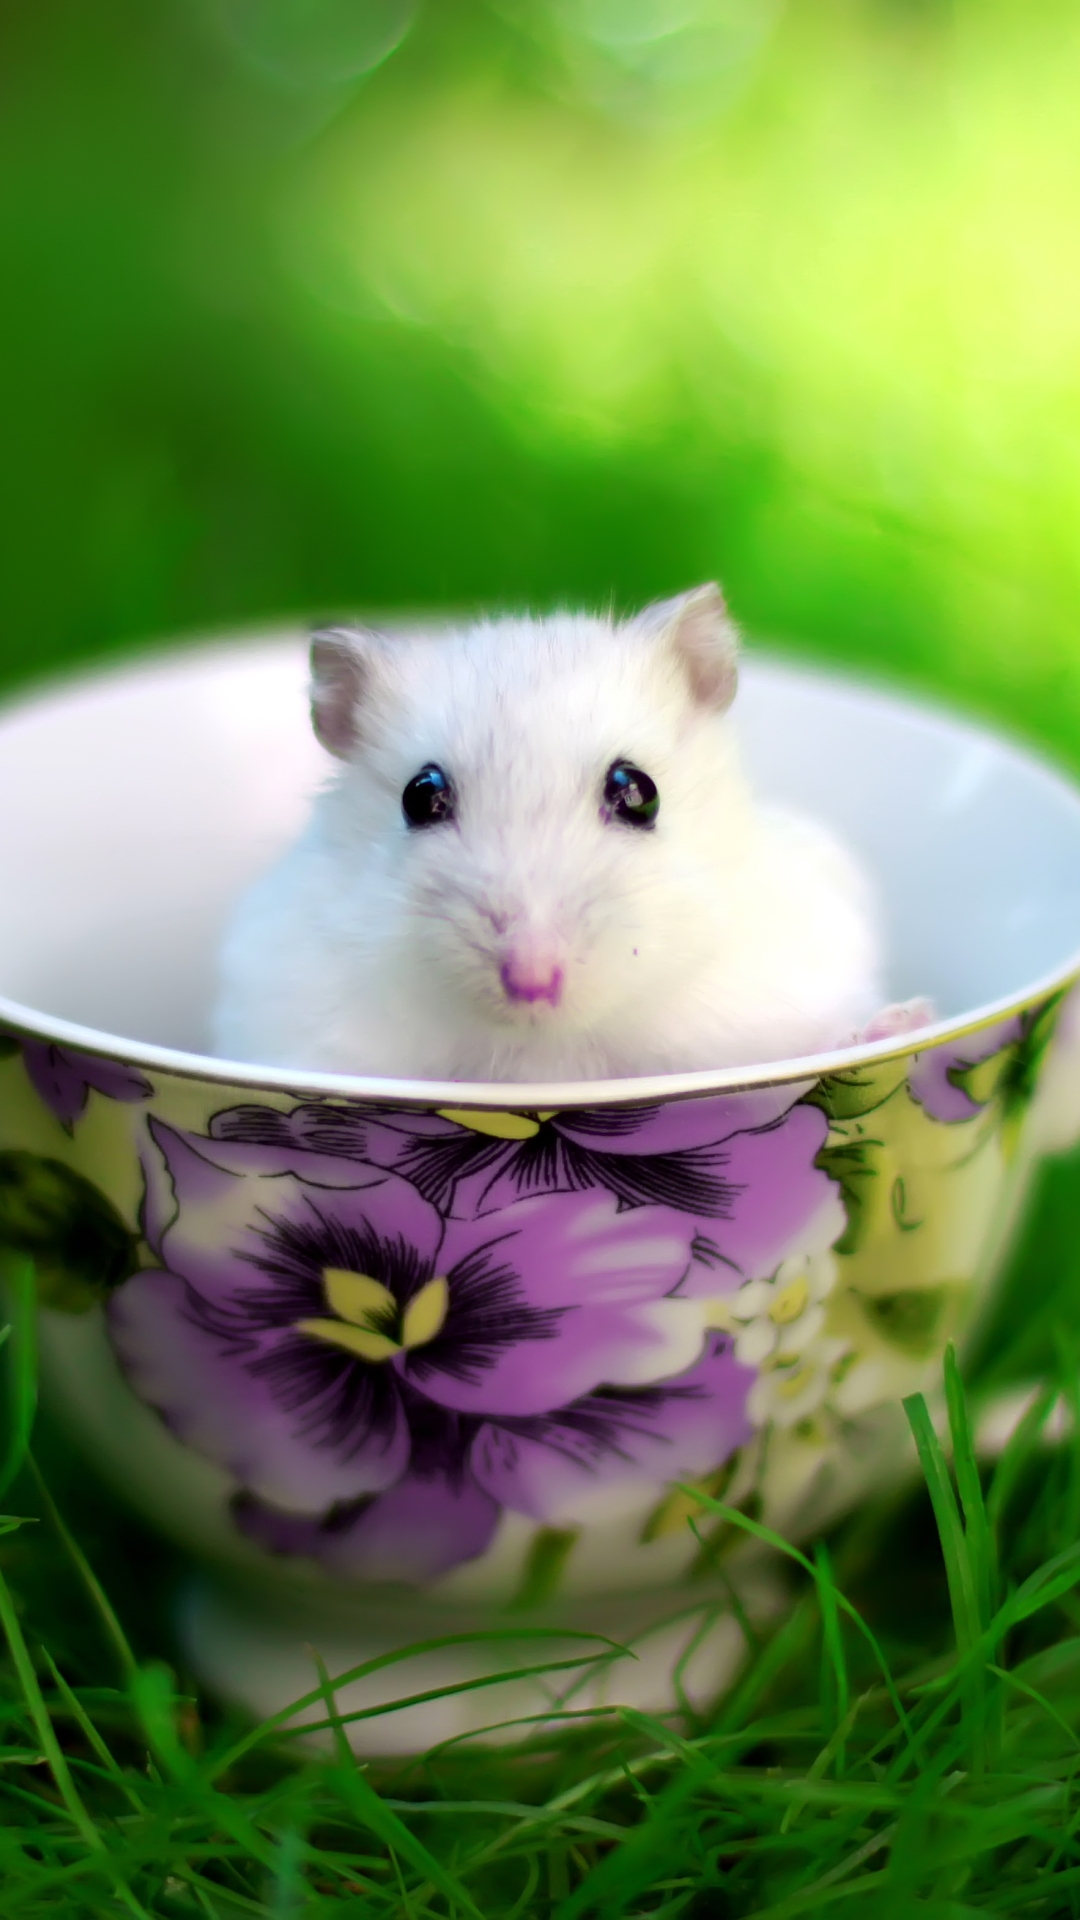 Cute White Mouse In Cup